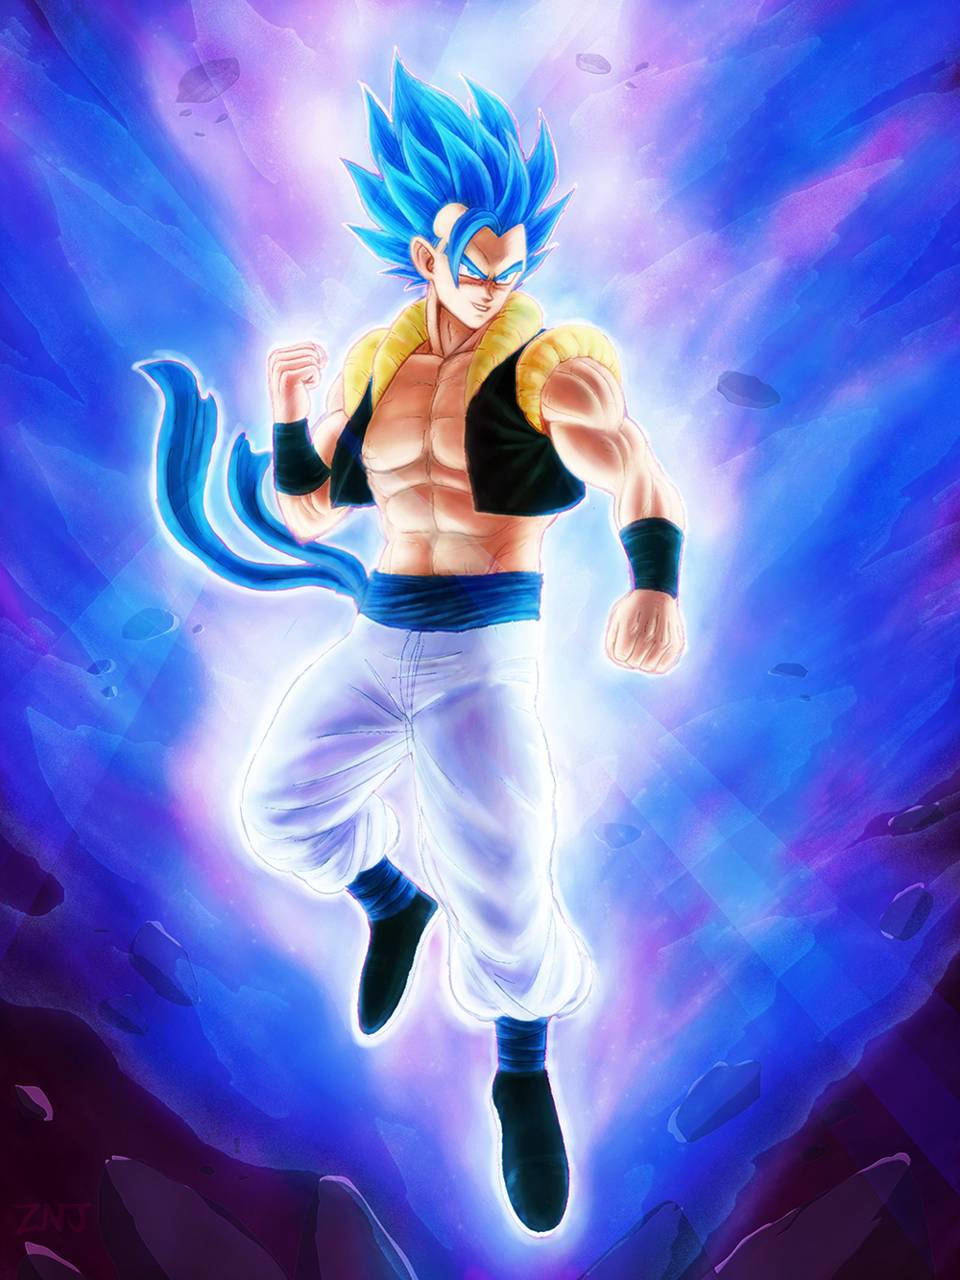 Gogeta Blue, ready to save the universe Wallpaper